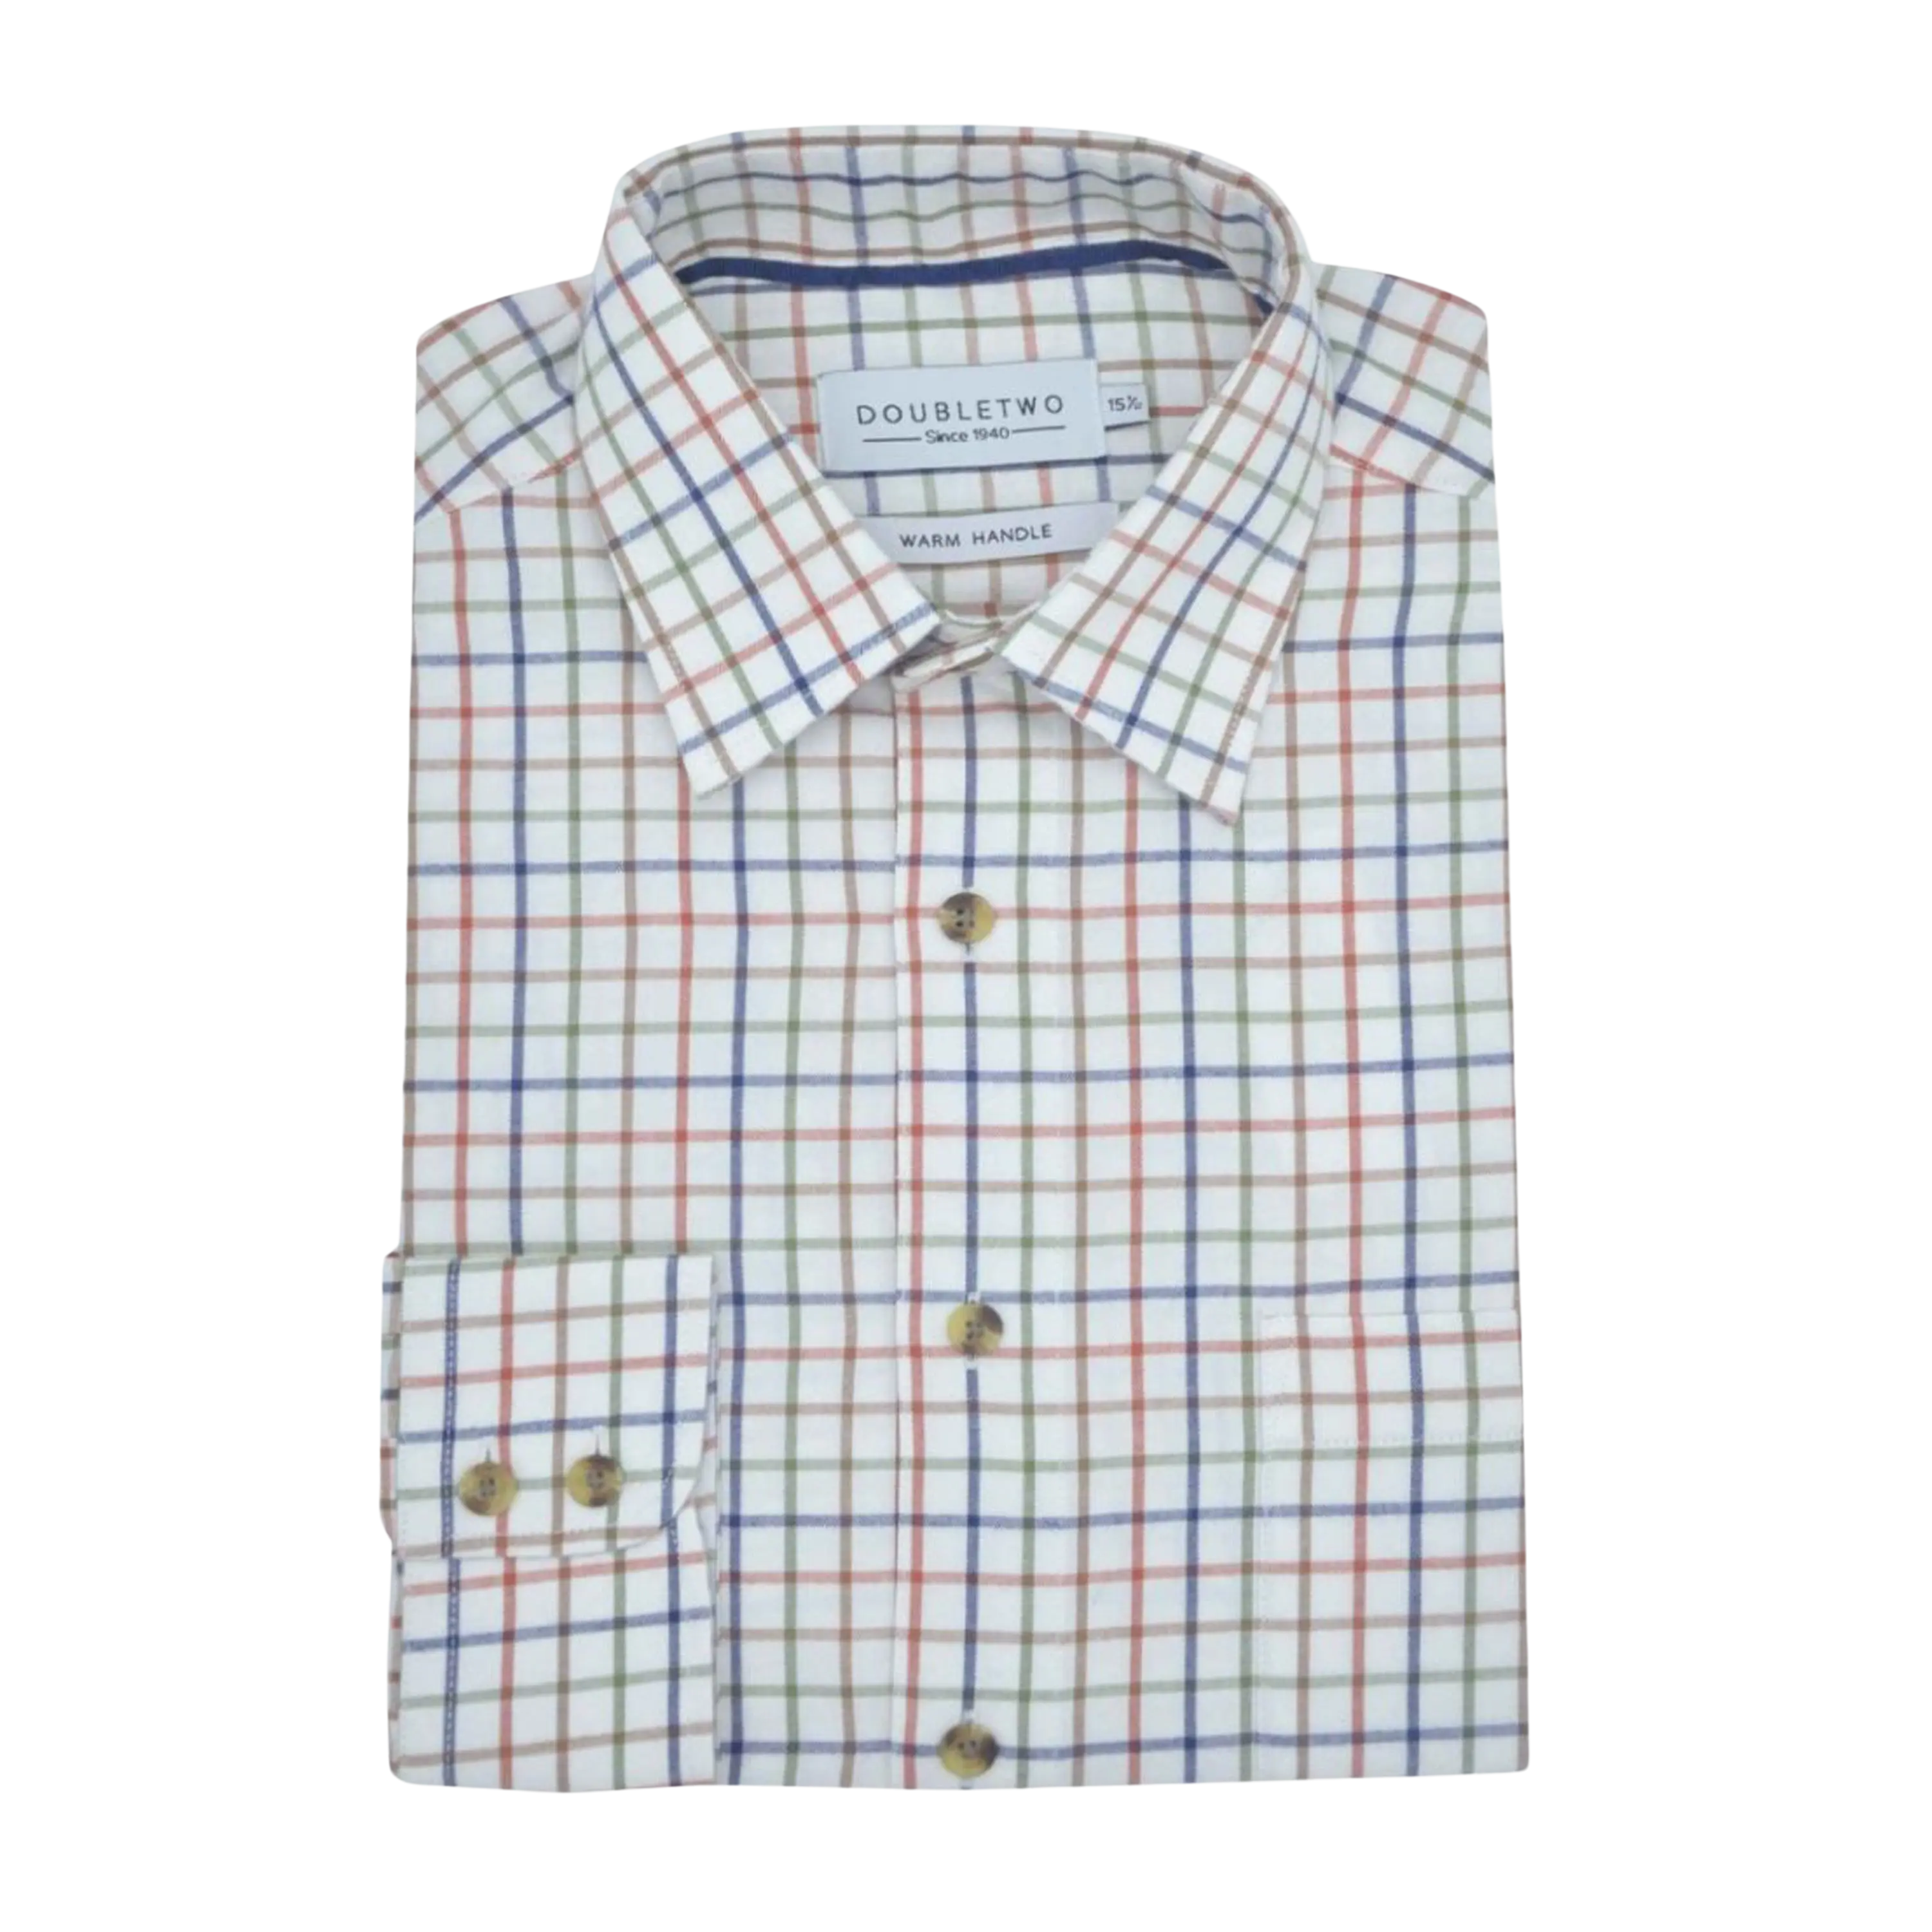 Double Two Tattersall Long Sleeves Brushed Cotton Neat Check Shirt for Men